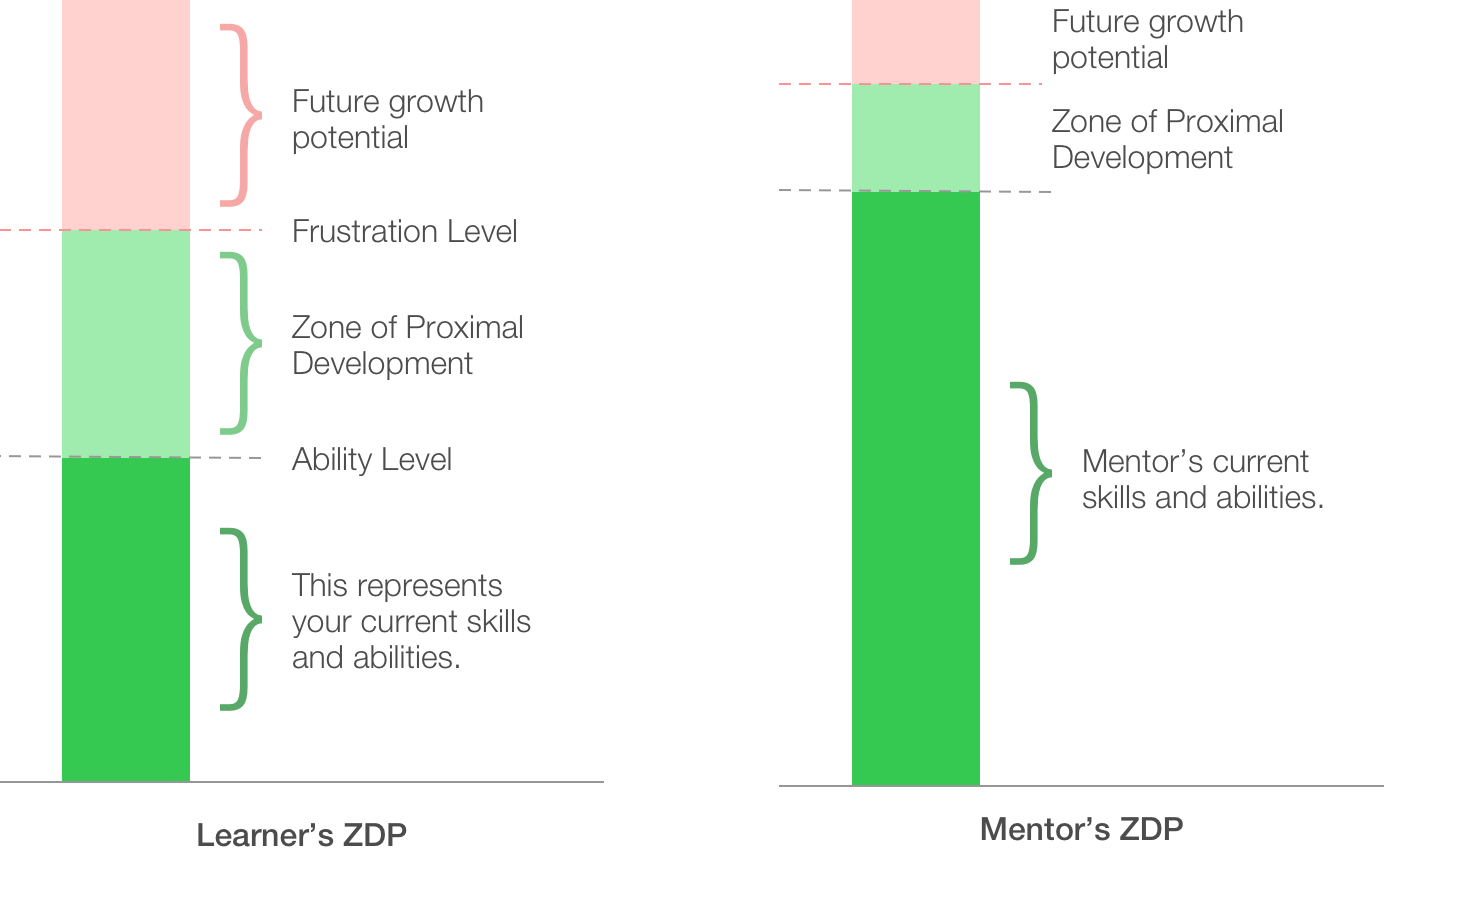 Showing a learner’s ZDP compared to a mentor’s ZDP, which has a larger area of current skill and ability